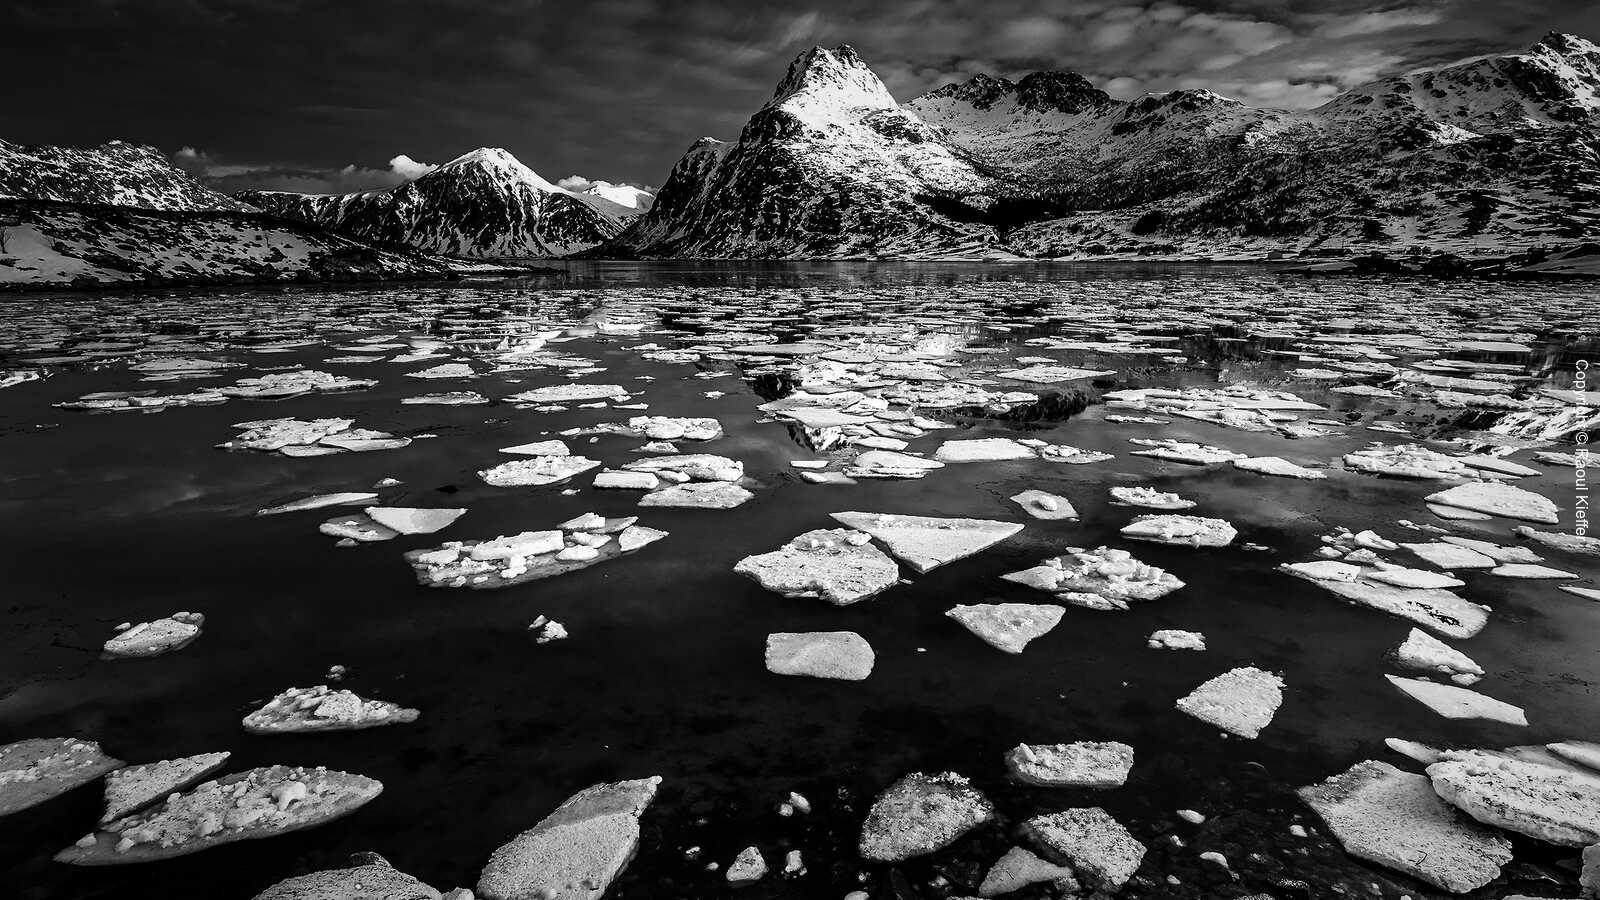 Black-and-white landscapes